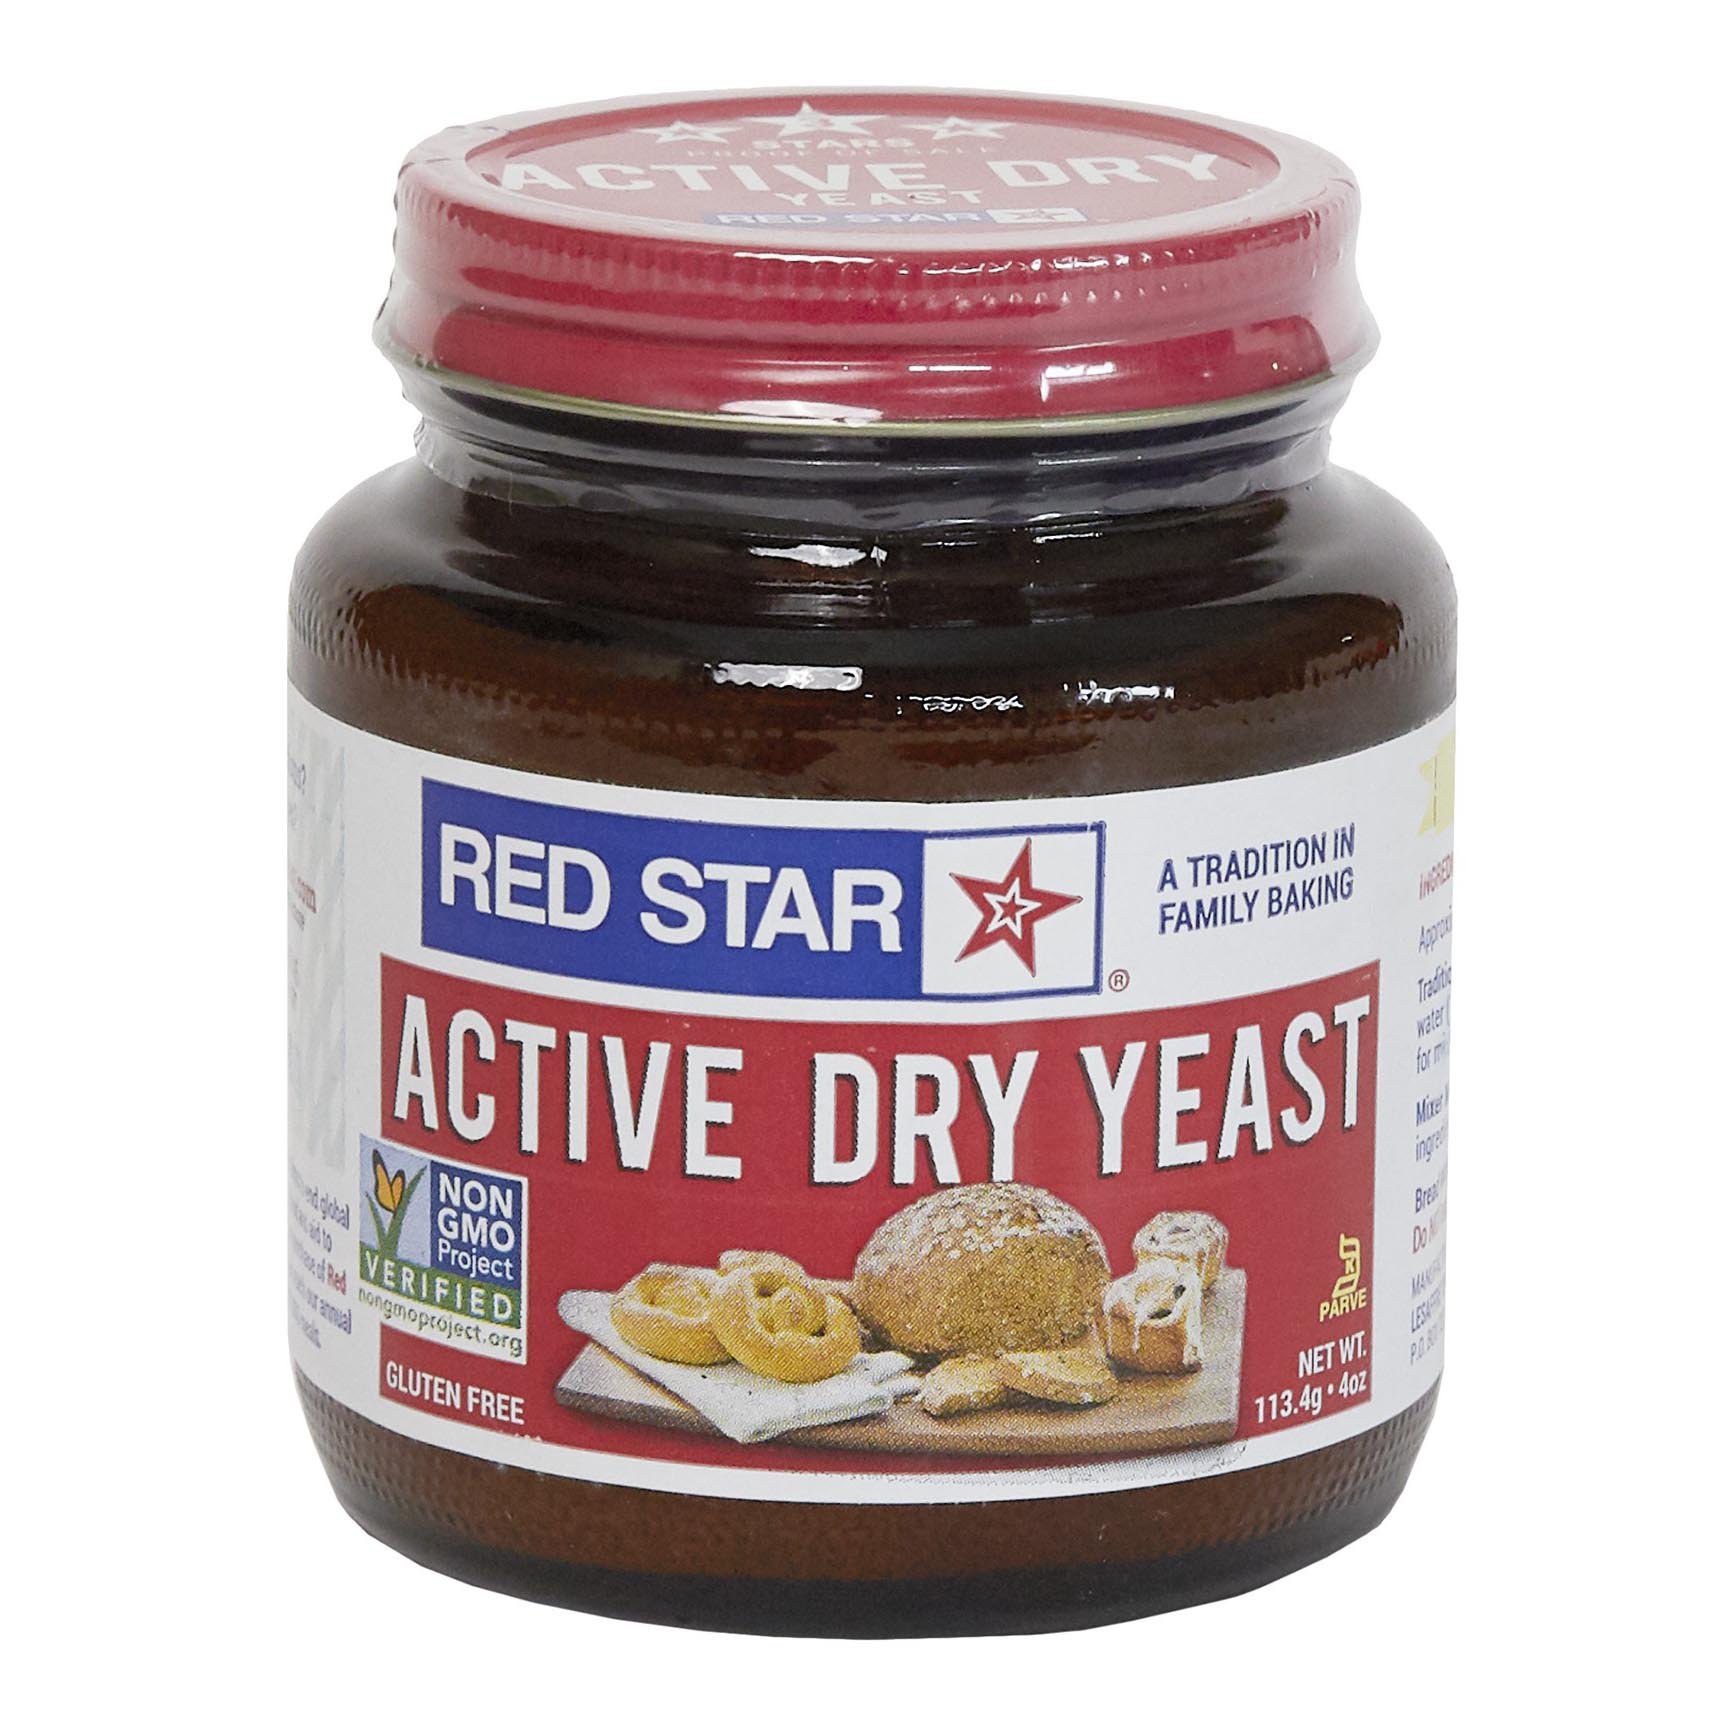 Red Star Active Dry Original Yeast Shop Yeast At H E B